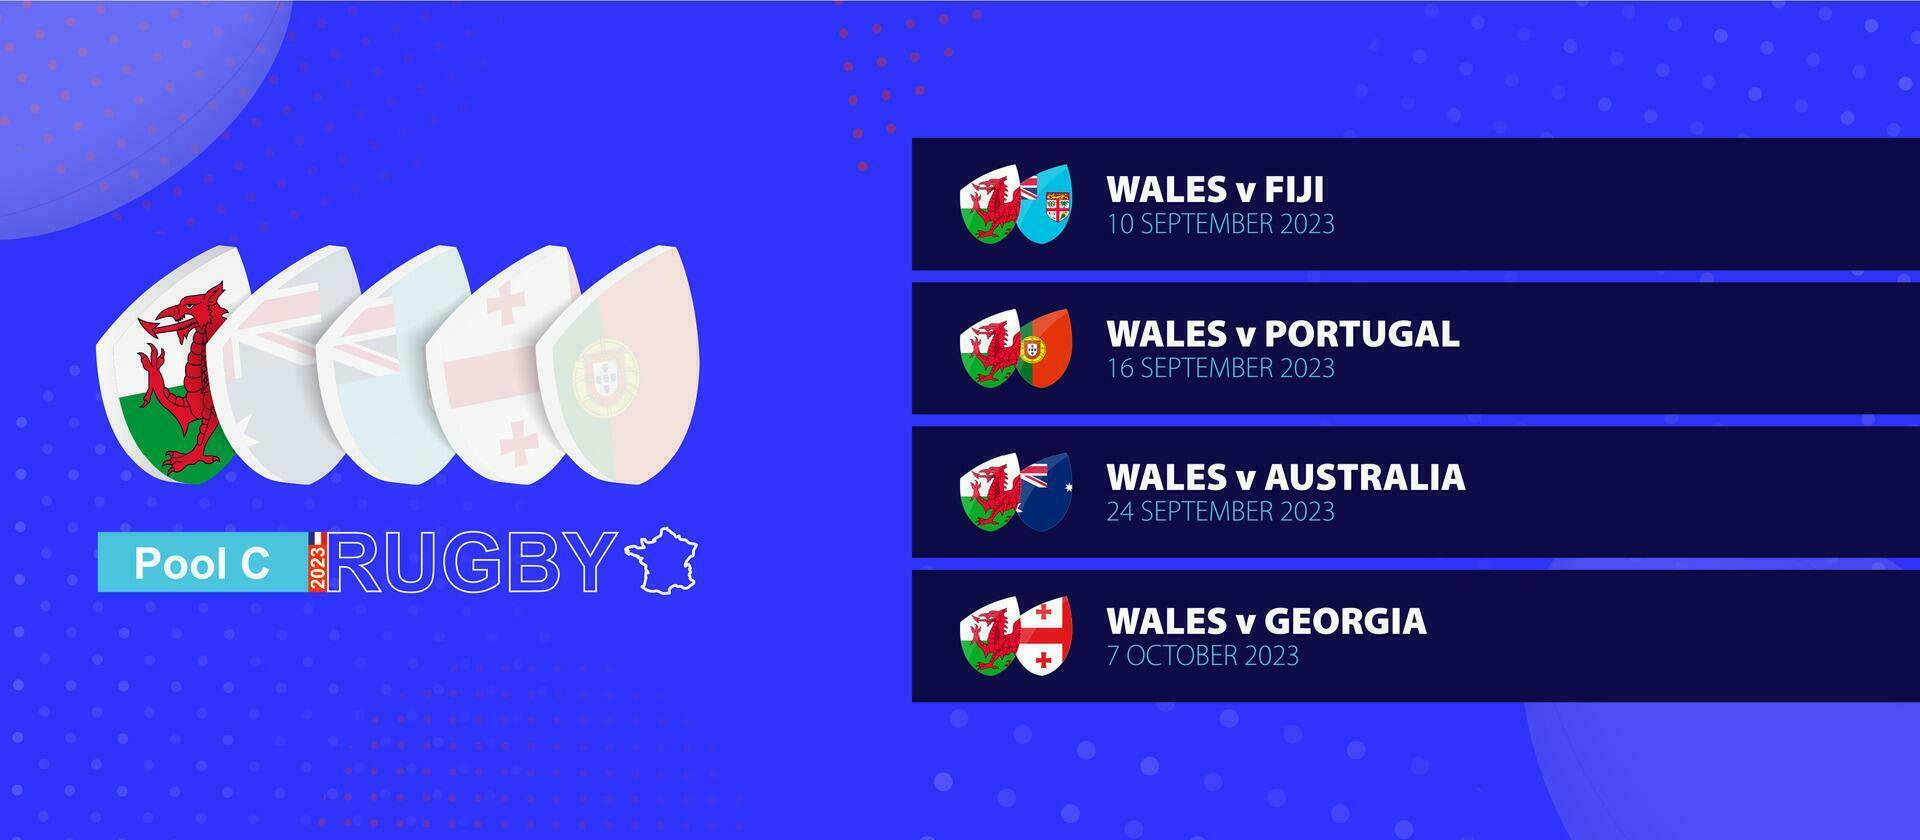 Wales rugby national team schedule matches in group stage of international rugby competition. vector